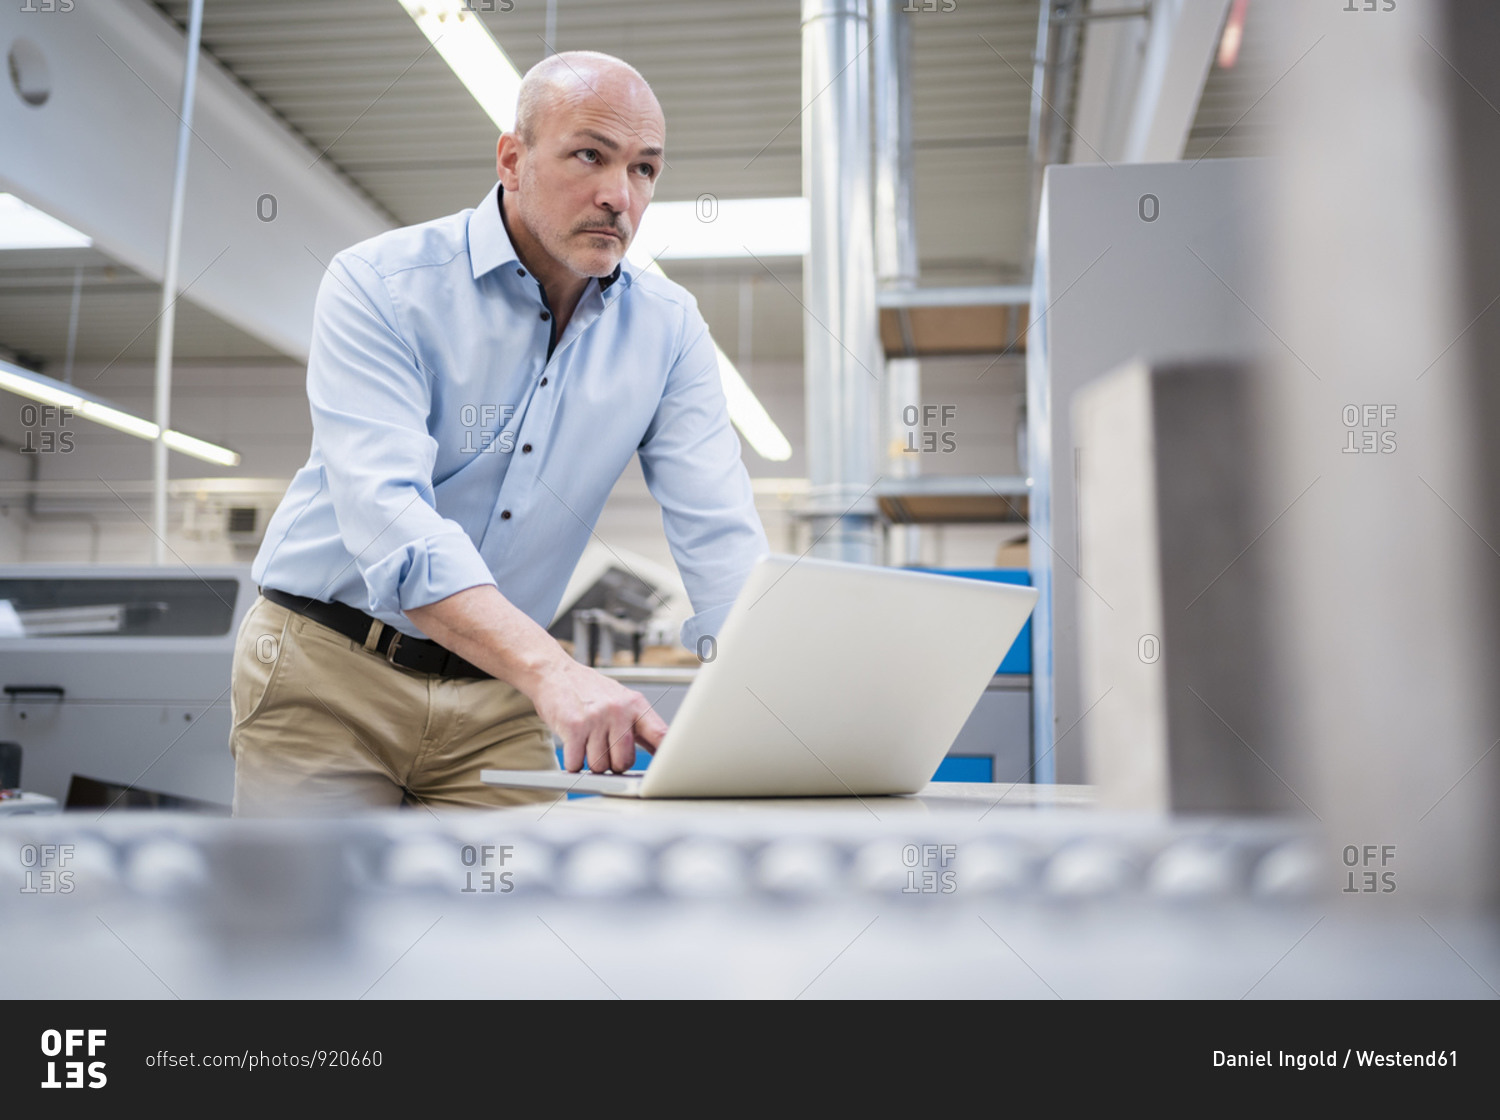 Businessman using laptop in a factory